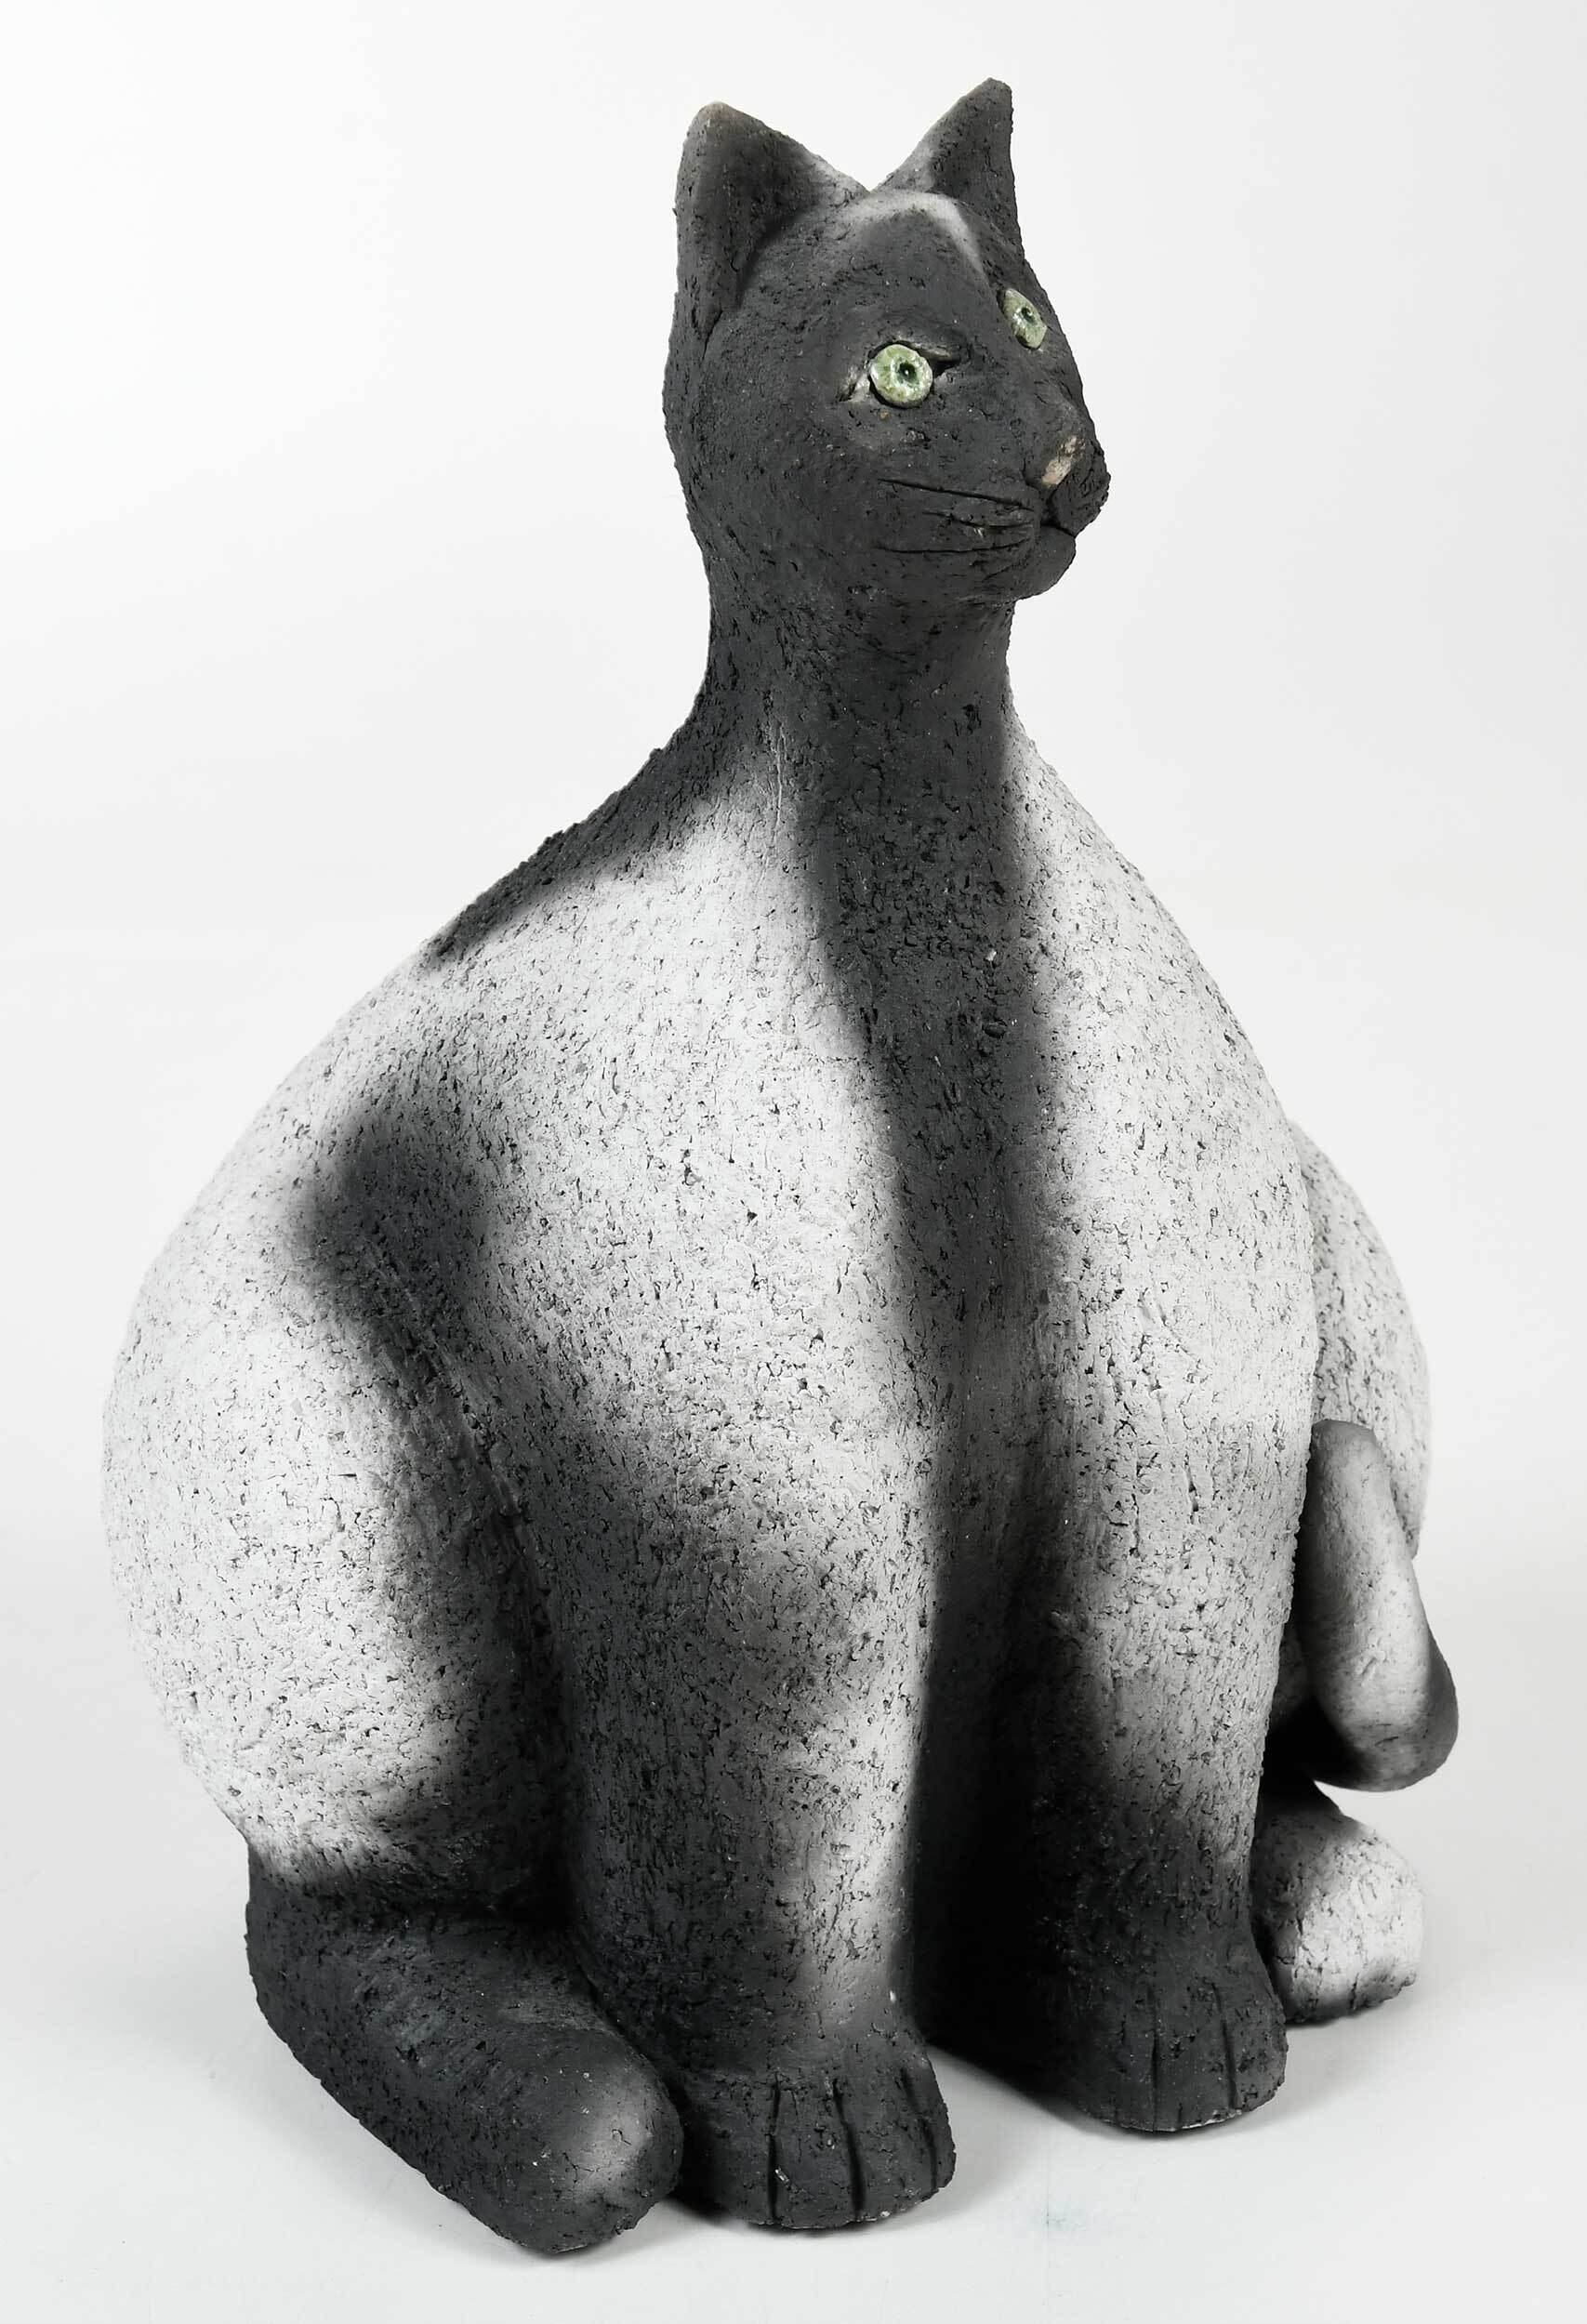 Artwork by Jean-paul Bonnet, A Black and White Cat with Green Eyes, Made of Black and White